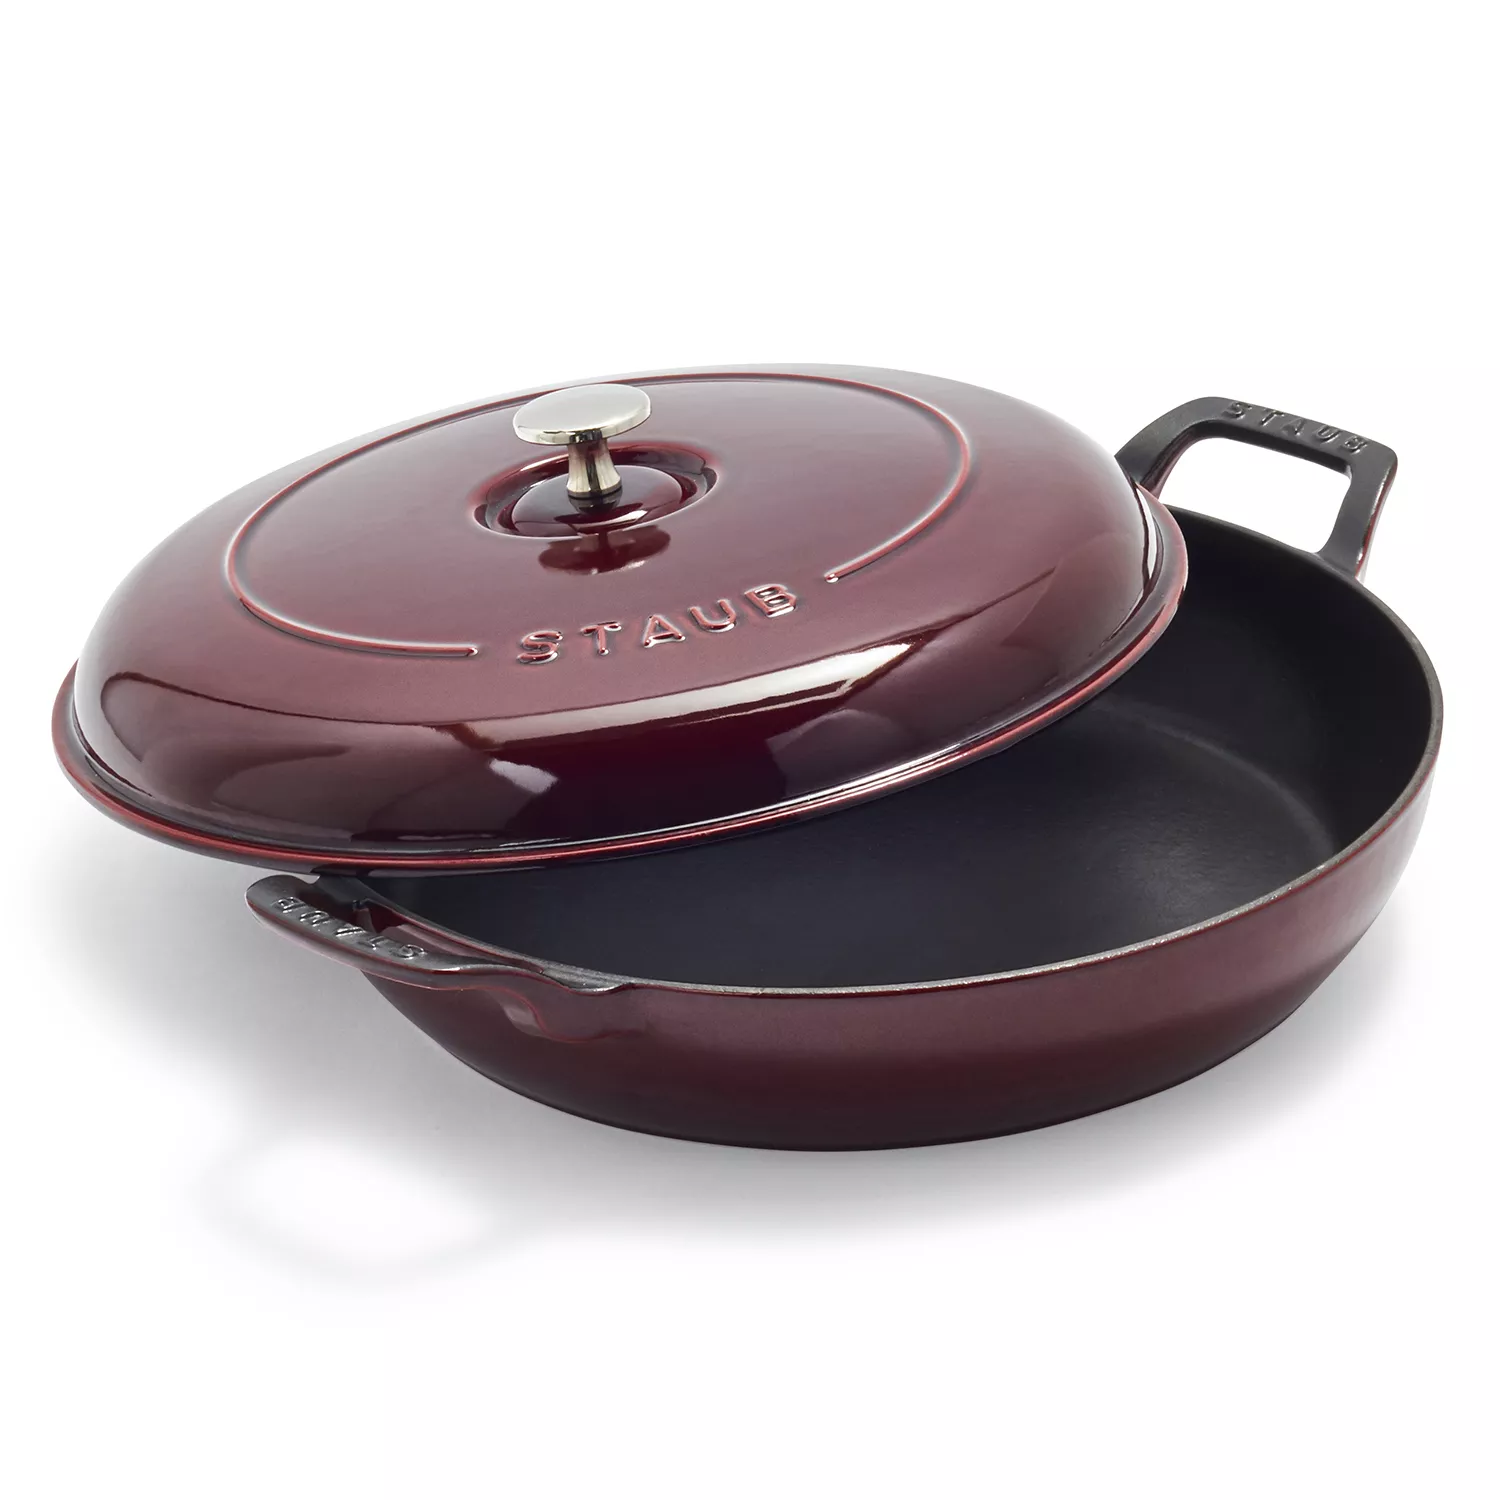 Staub Heritage All-Day Pan with Domed Glass Lid, 3.5 qt., Sur La Table